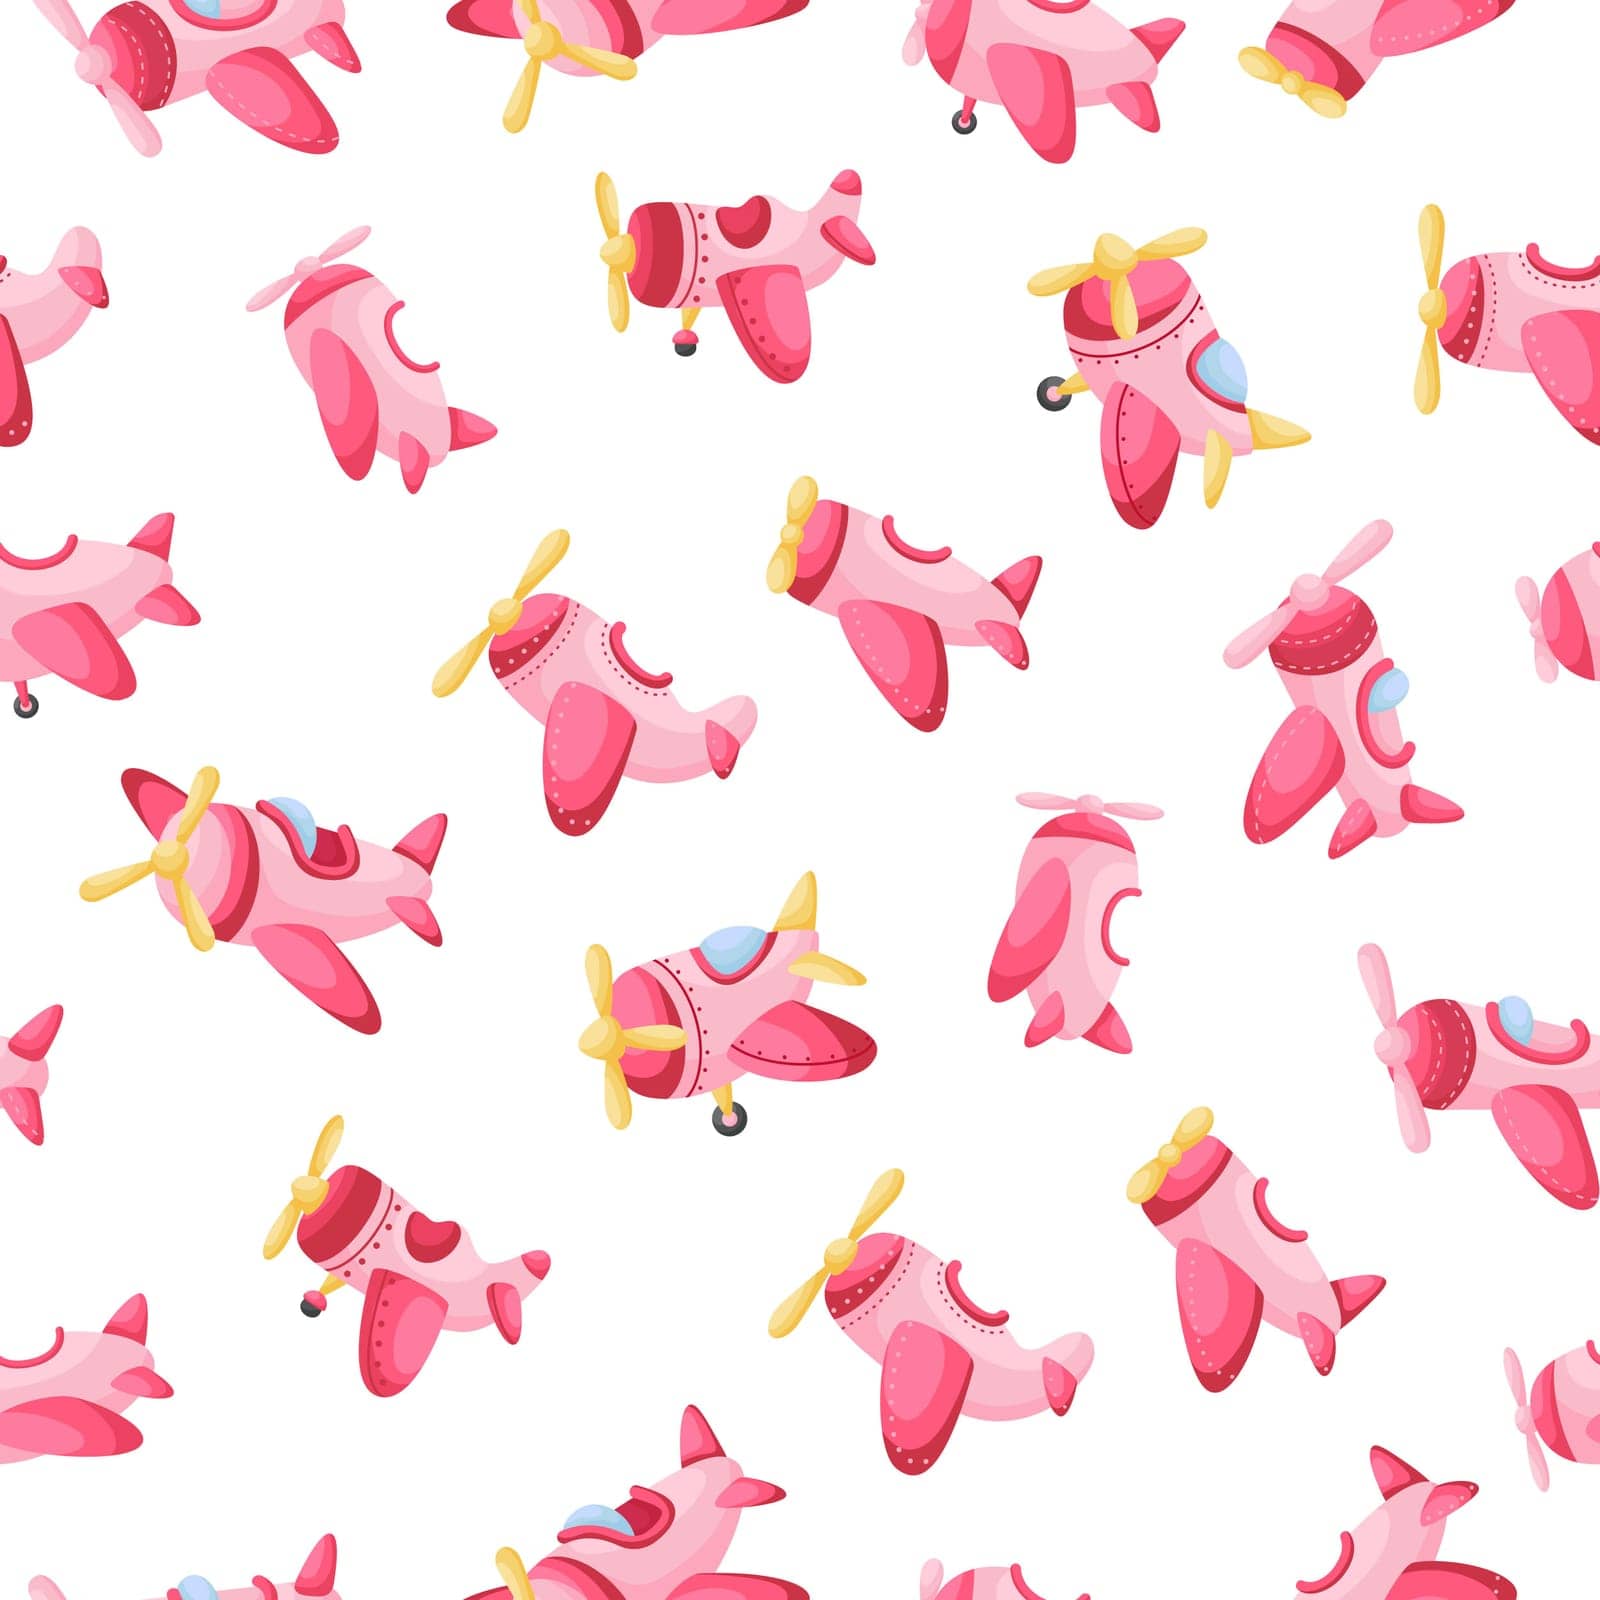 Cute children's seamless pattern with pink planes. Creative kids texture for fabric, wrapping, textile, wallpaper, apparel. Vector illustration by Melnyk